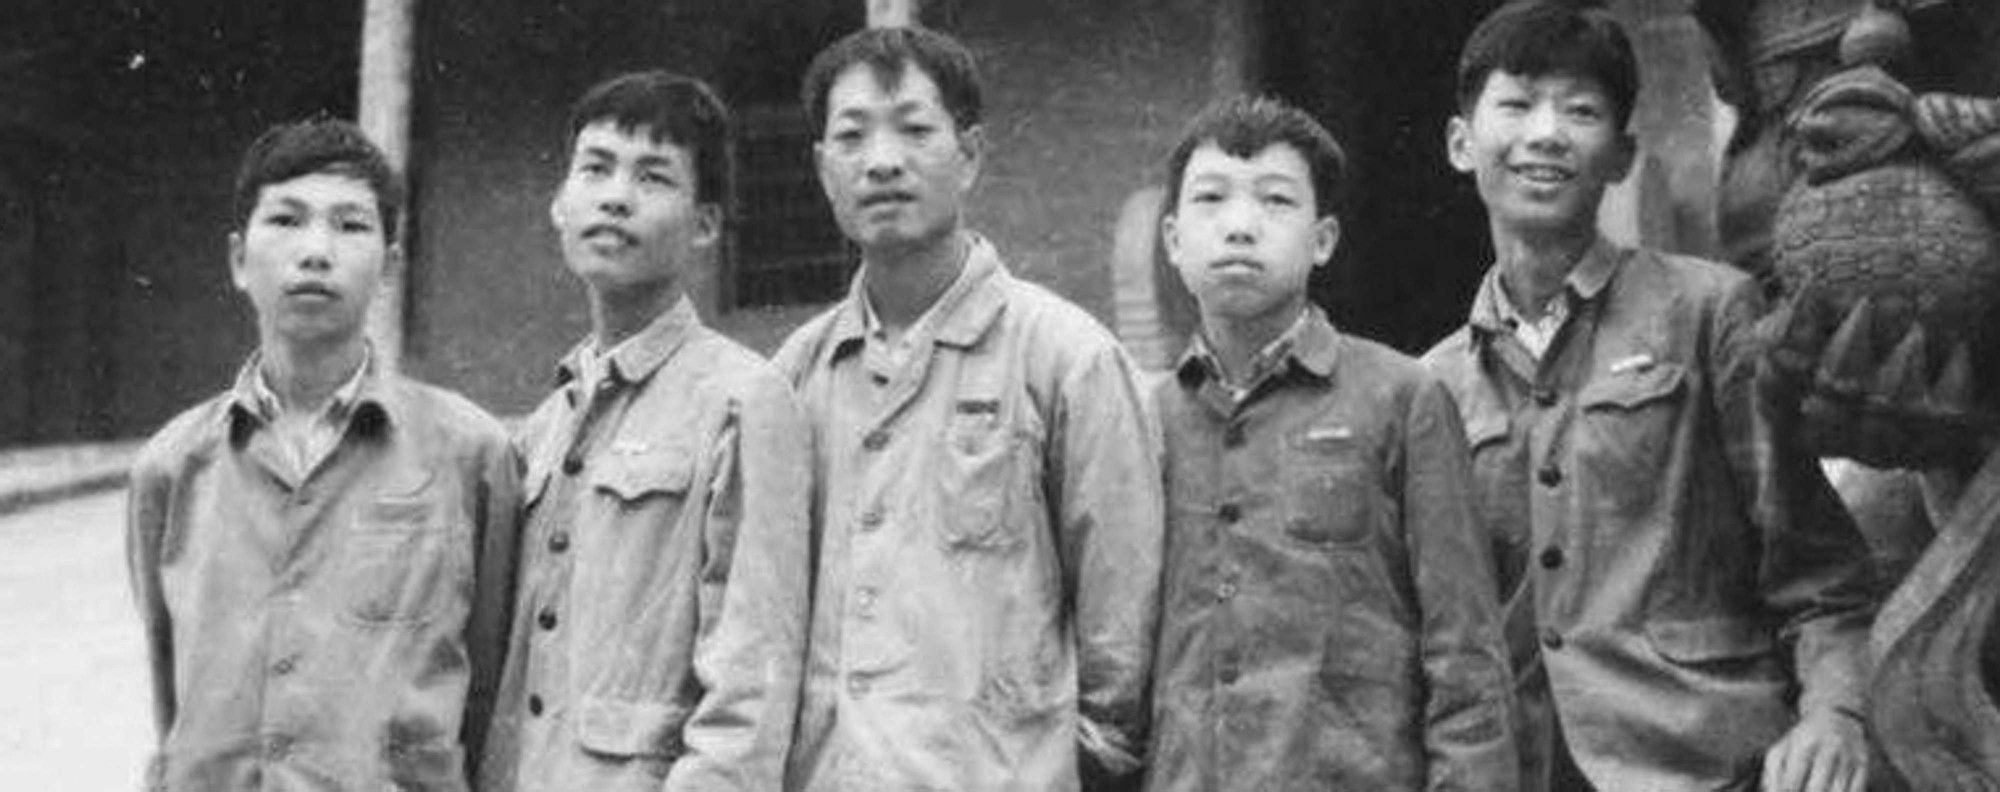 Best friends He Yixin (right) and Wang Mengxin (second to right) with a teacher (middle) and classmates at Tingjiang Secondary in 1971. All but He came to the U.S. for a better life. But He is now the wealthiest person among them all. Image courtesy of South China Morning Post.